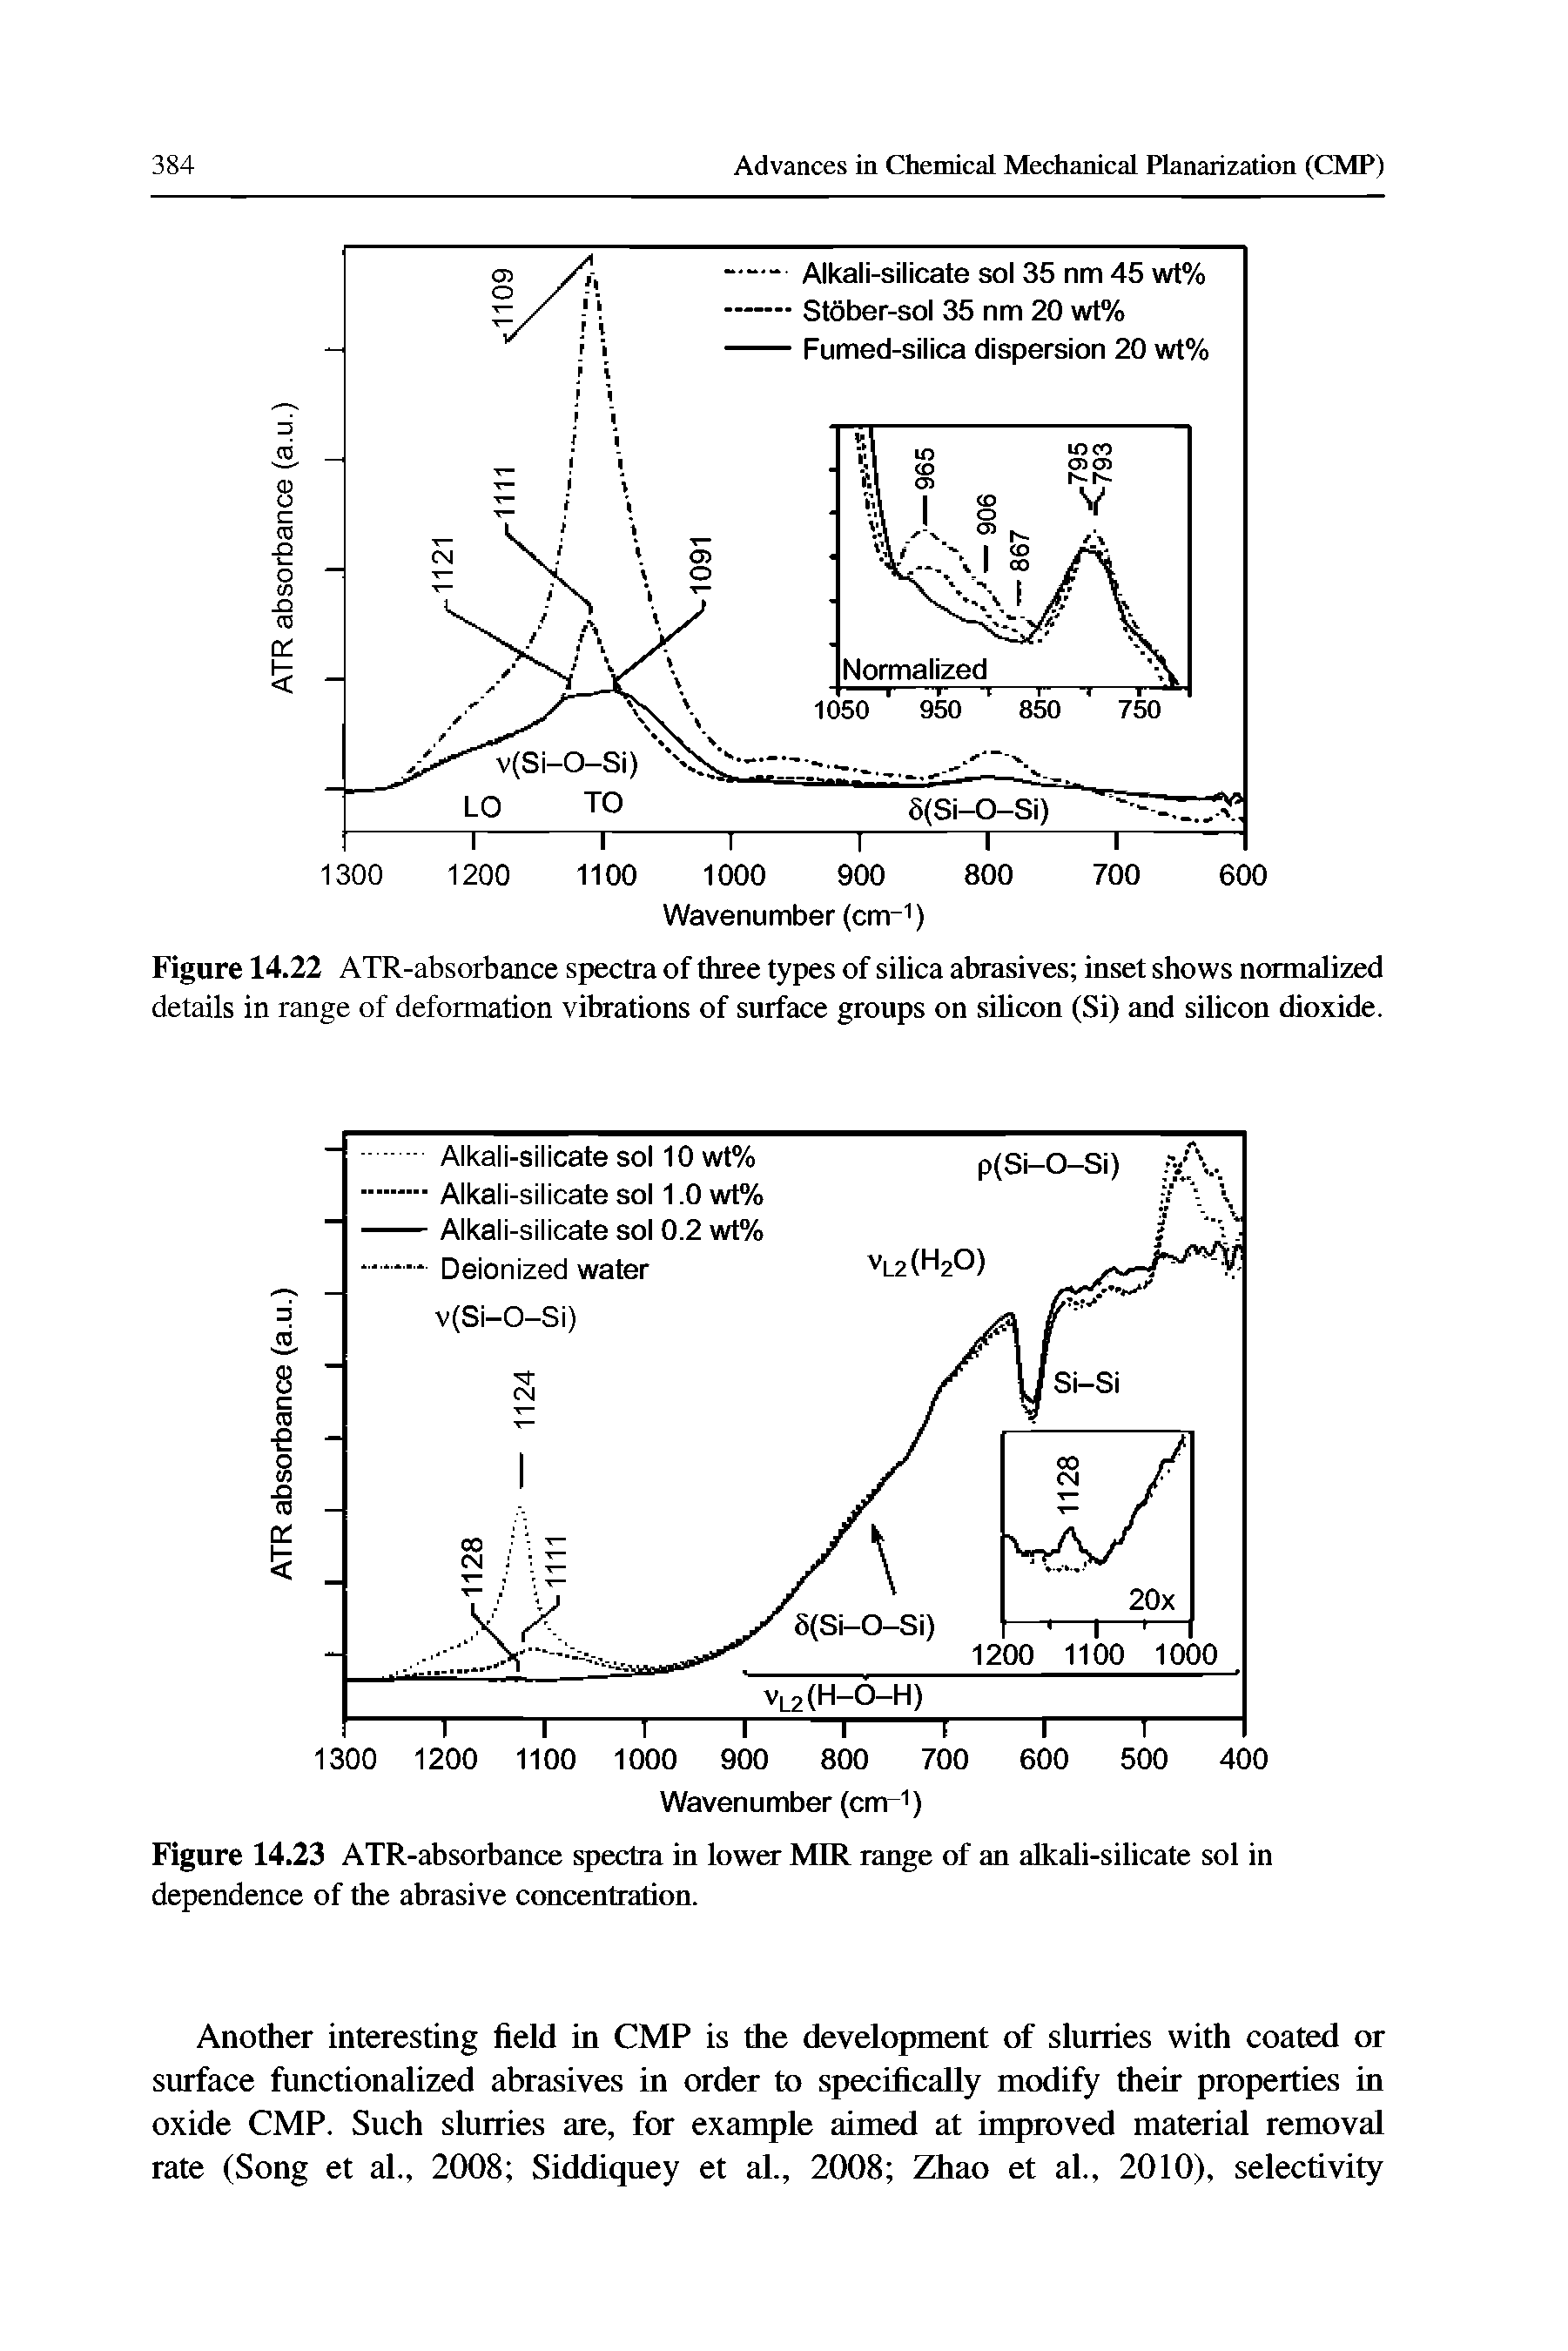 Figure 14.23 ATR-absorbance spectra in lower MIR range of an alkali-silicate sol in dependence of the abrasive concentration.